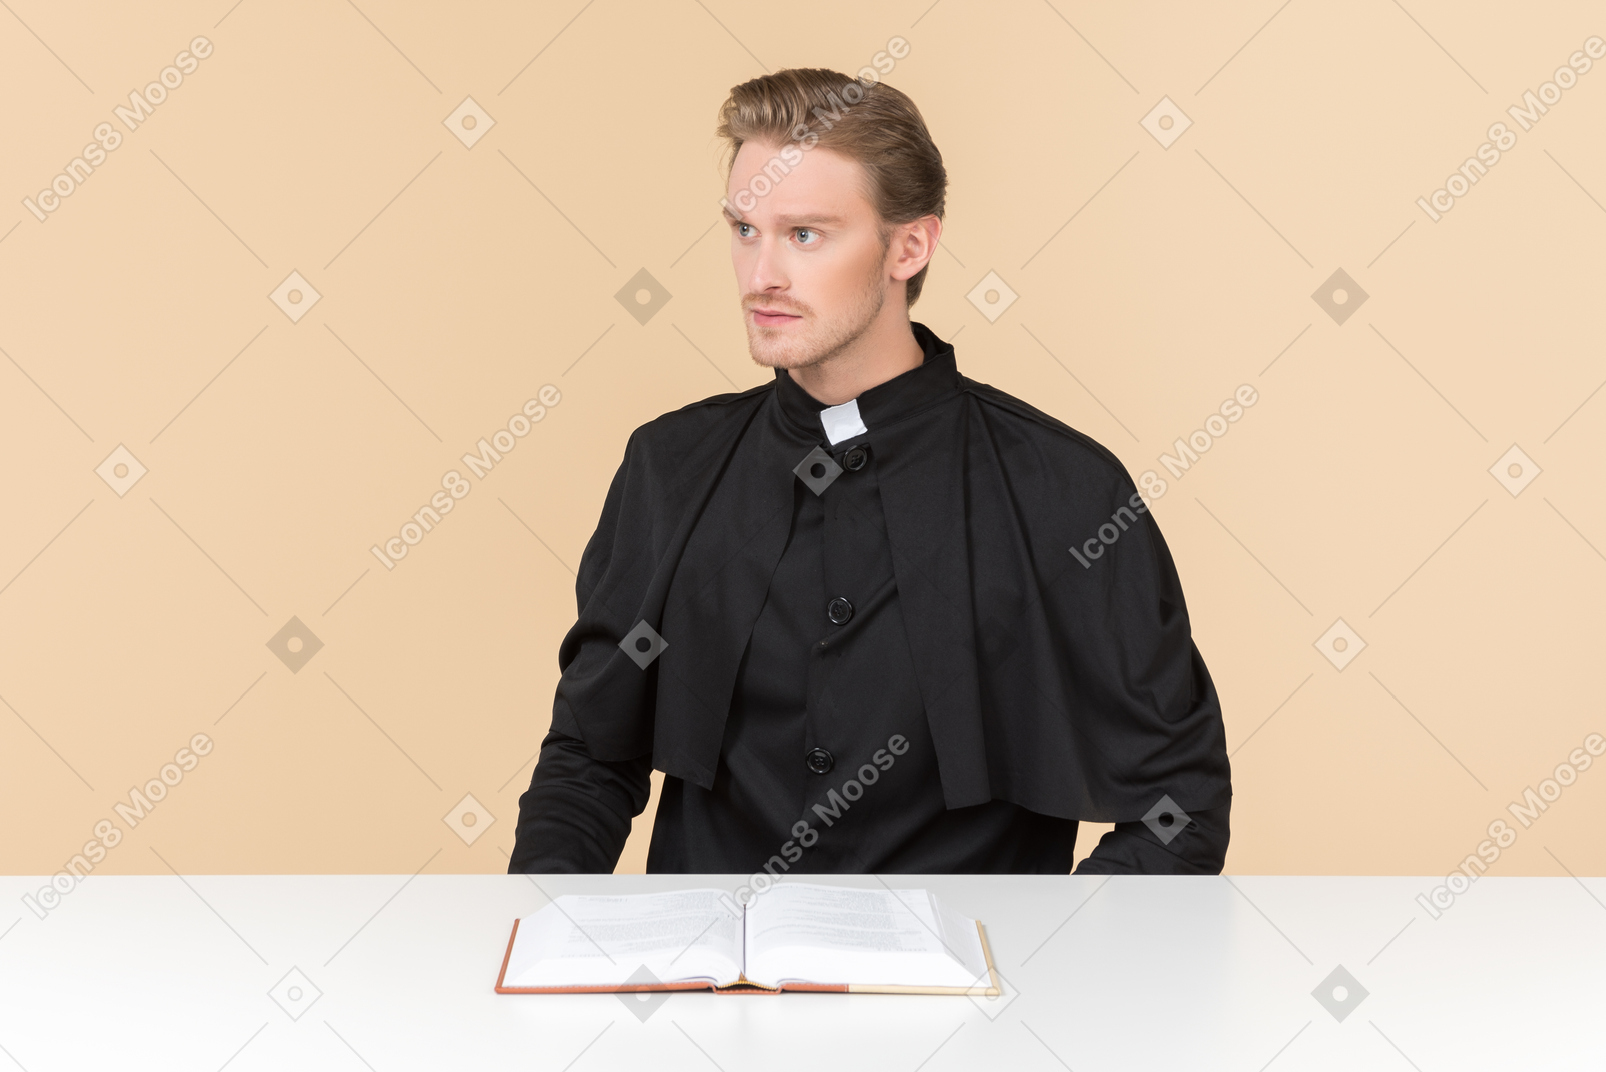 Catholic priest sitting at the table with open book on it